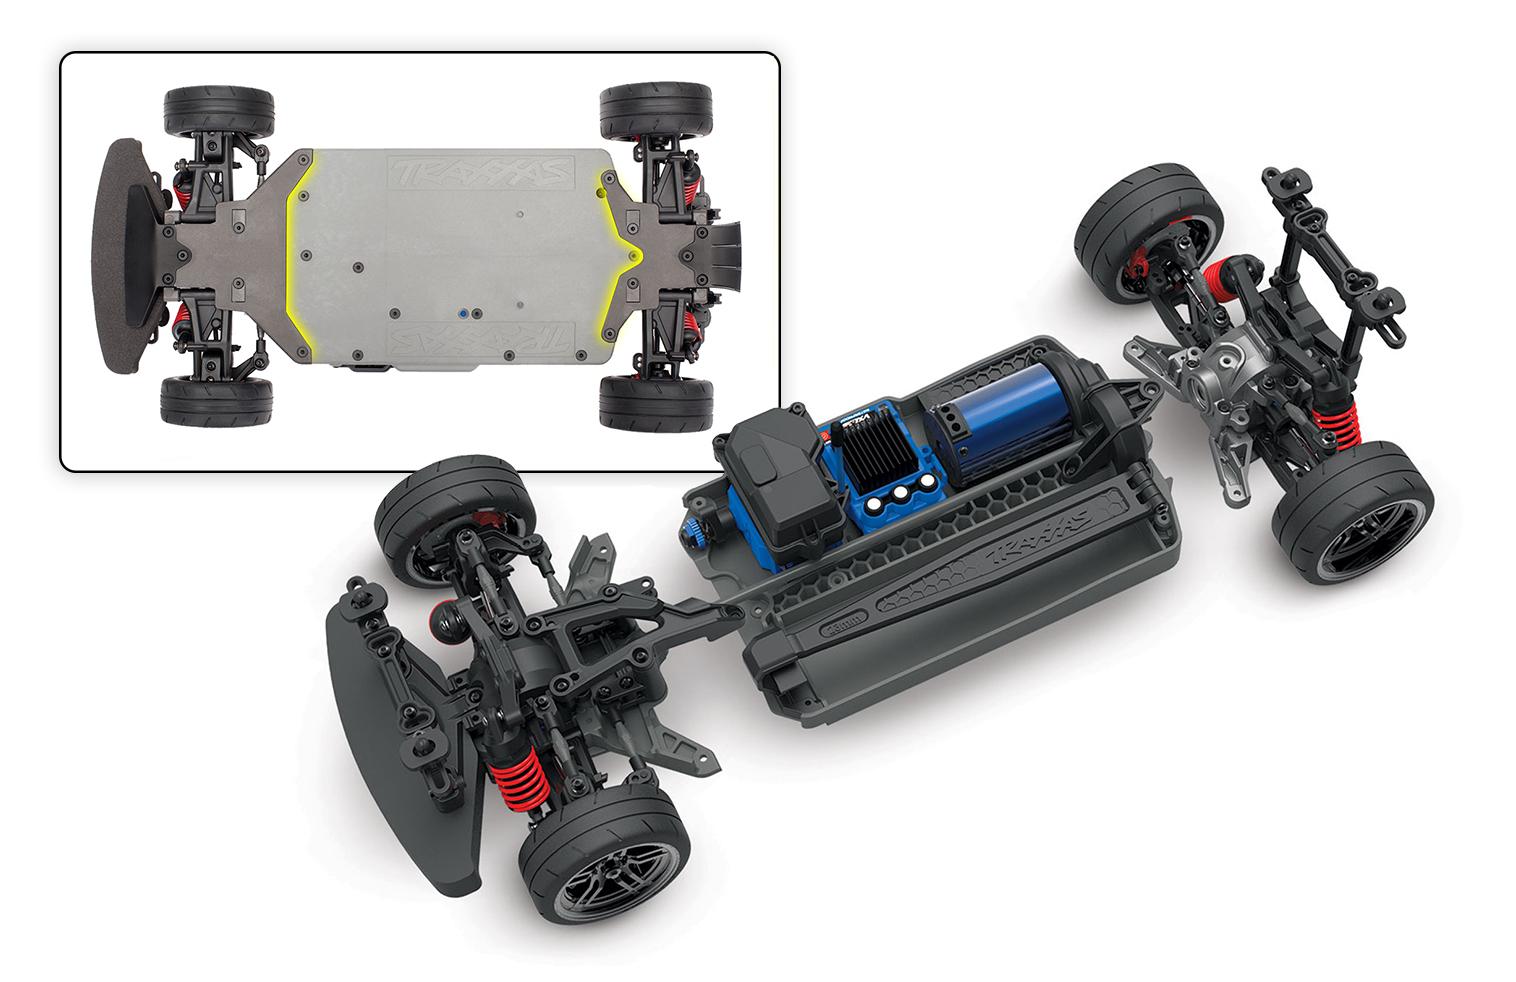 Traxxas 4 Tec 3.0 Body:  Defining and using the provided classOptimize Performance with Traxxas 4 Tec 3.0 Body for Proper Fit